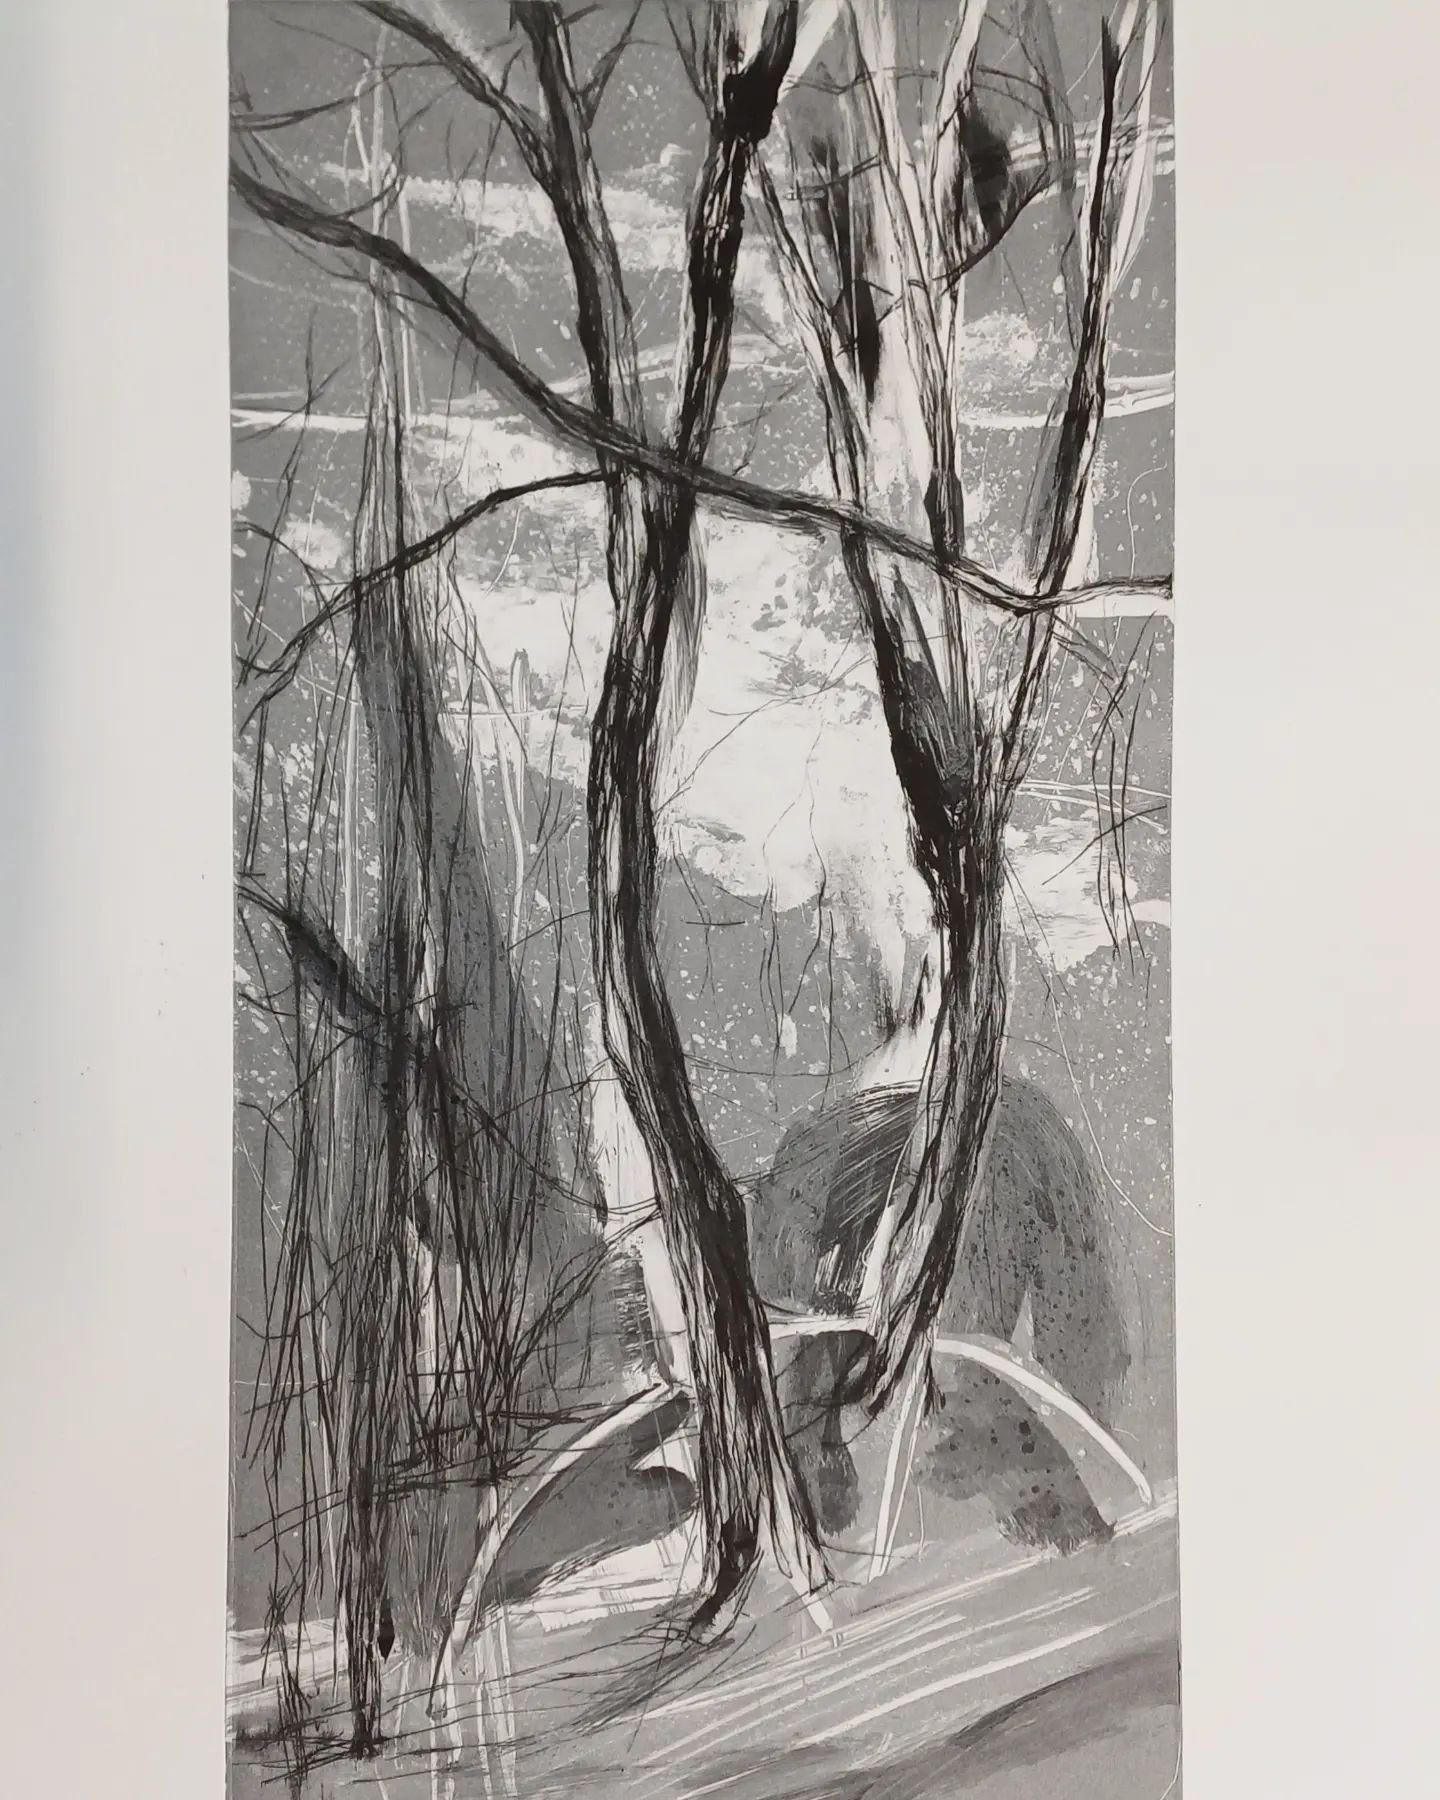 'In the Shadow of the Sun' a new silver monotype etching to be shown with @arcfinearts next month @affordableartfairuk in Hampstead.

This series of compositions are based on walks on the Hampstead Heath. A very interesting place, where you always se